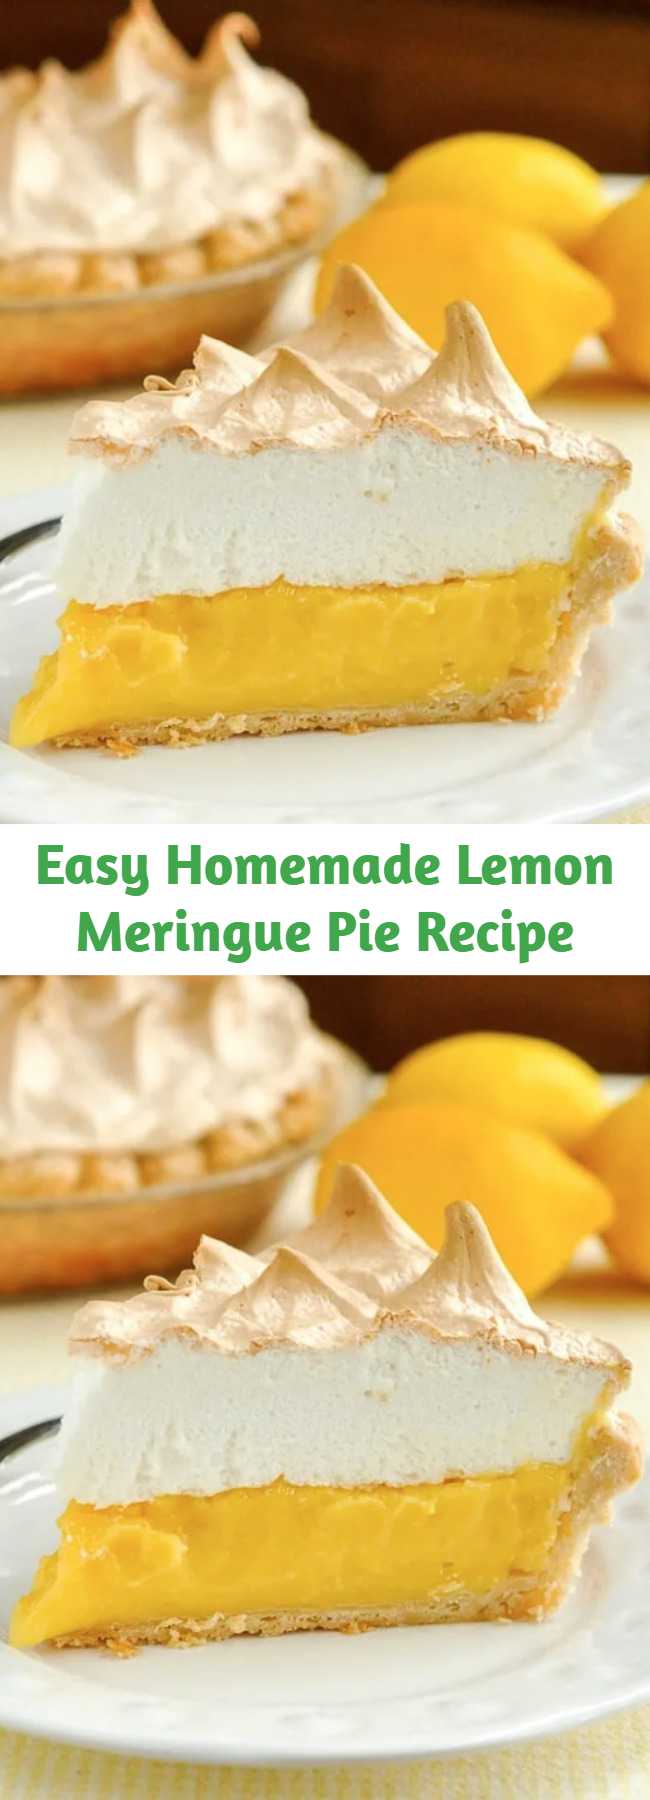 Easy Homemade Lemon Meringue Pie Recipe - If your pie comes from powder in a box, STOP! A fantastic homemade lemon meringue pie, made completely from scratch, tastes much better and is actually just as easy to prepare.